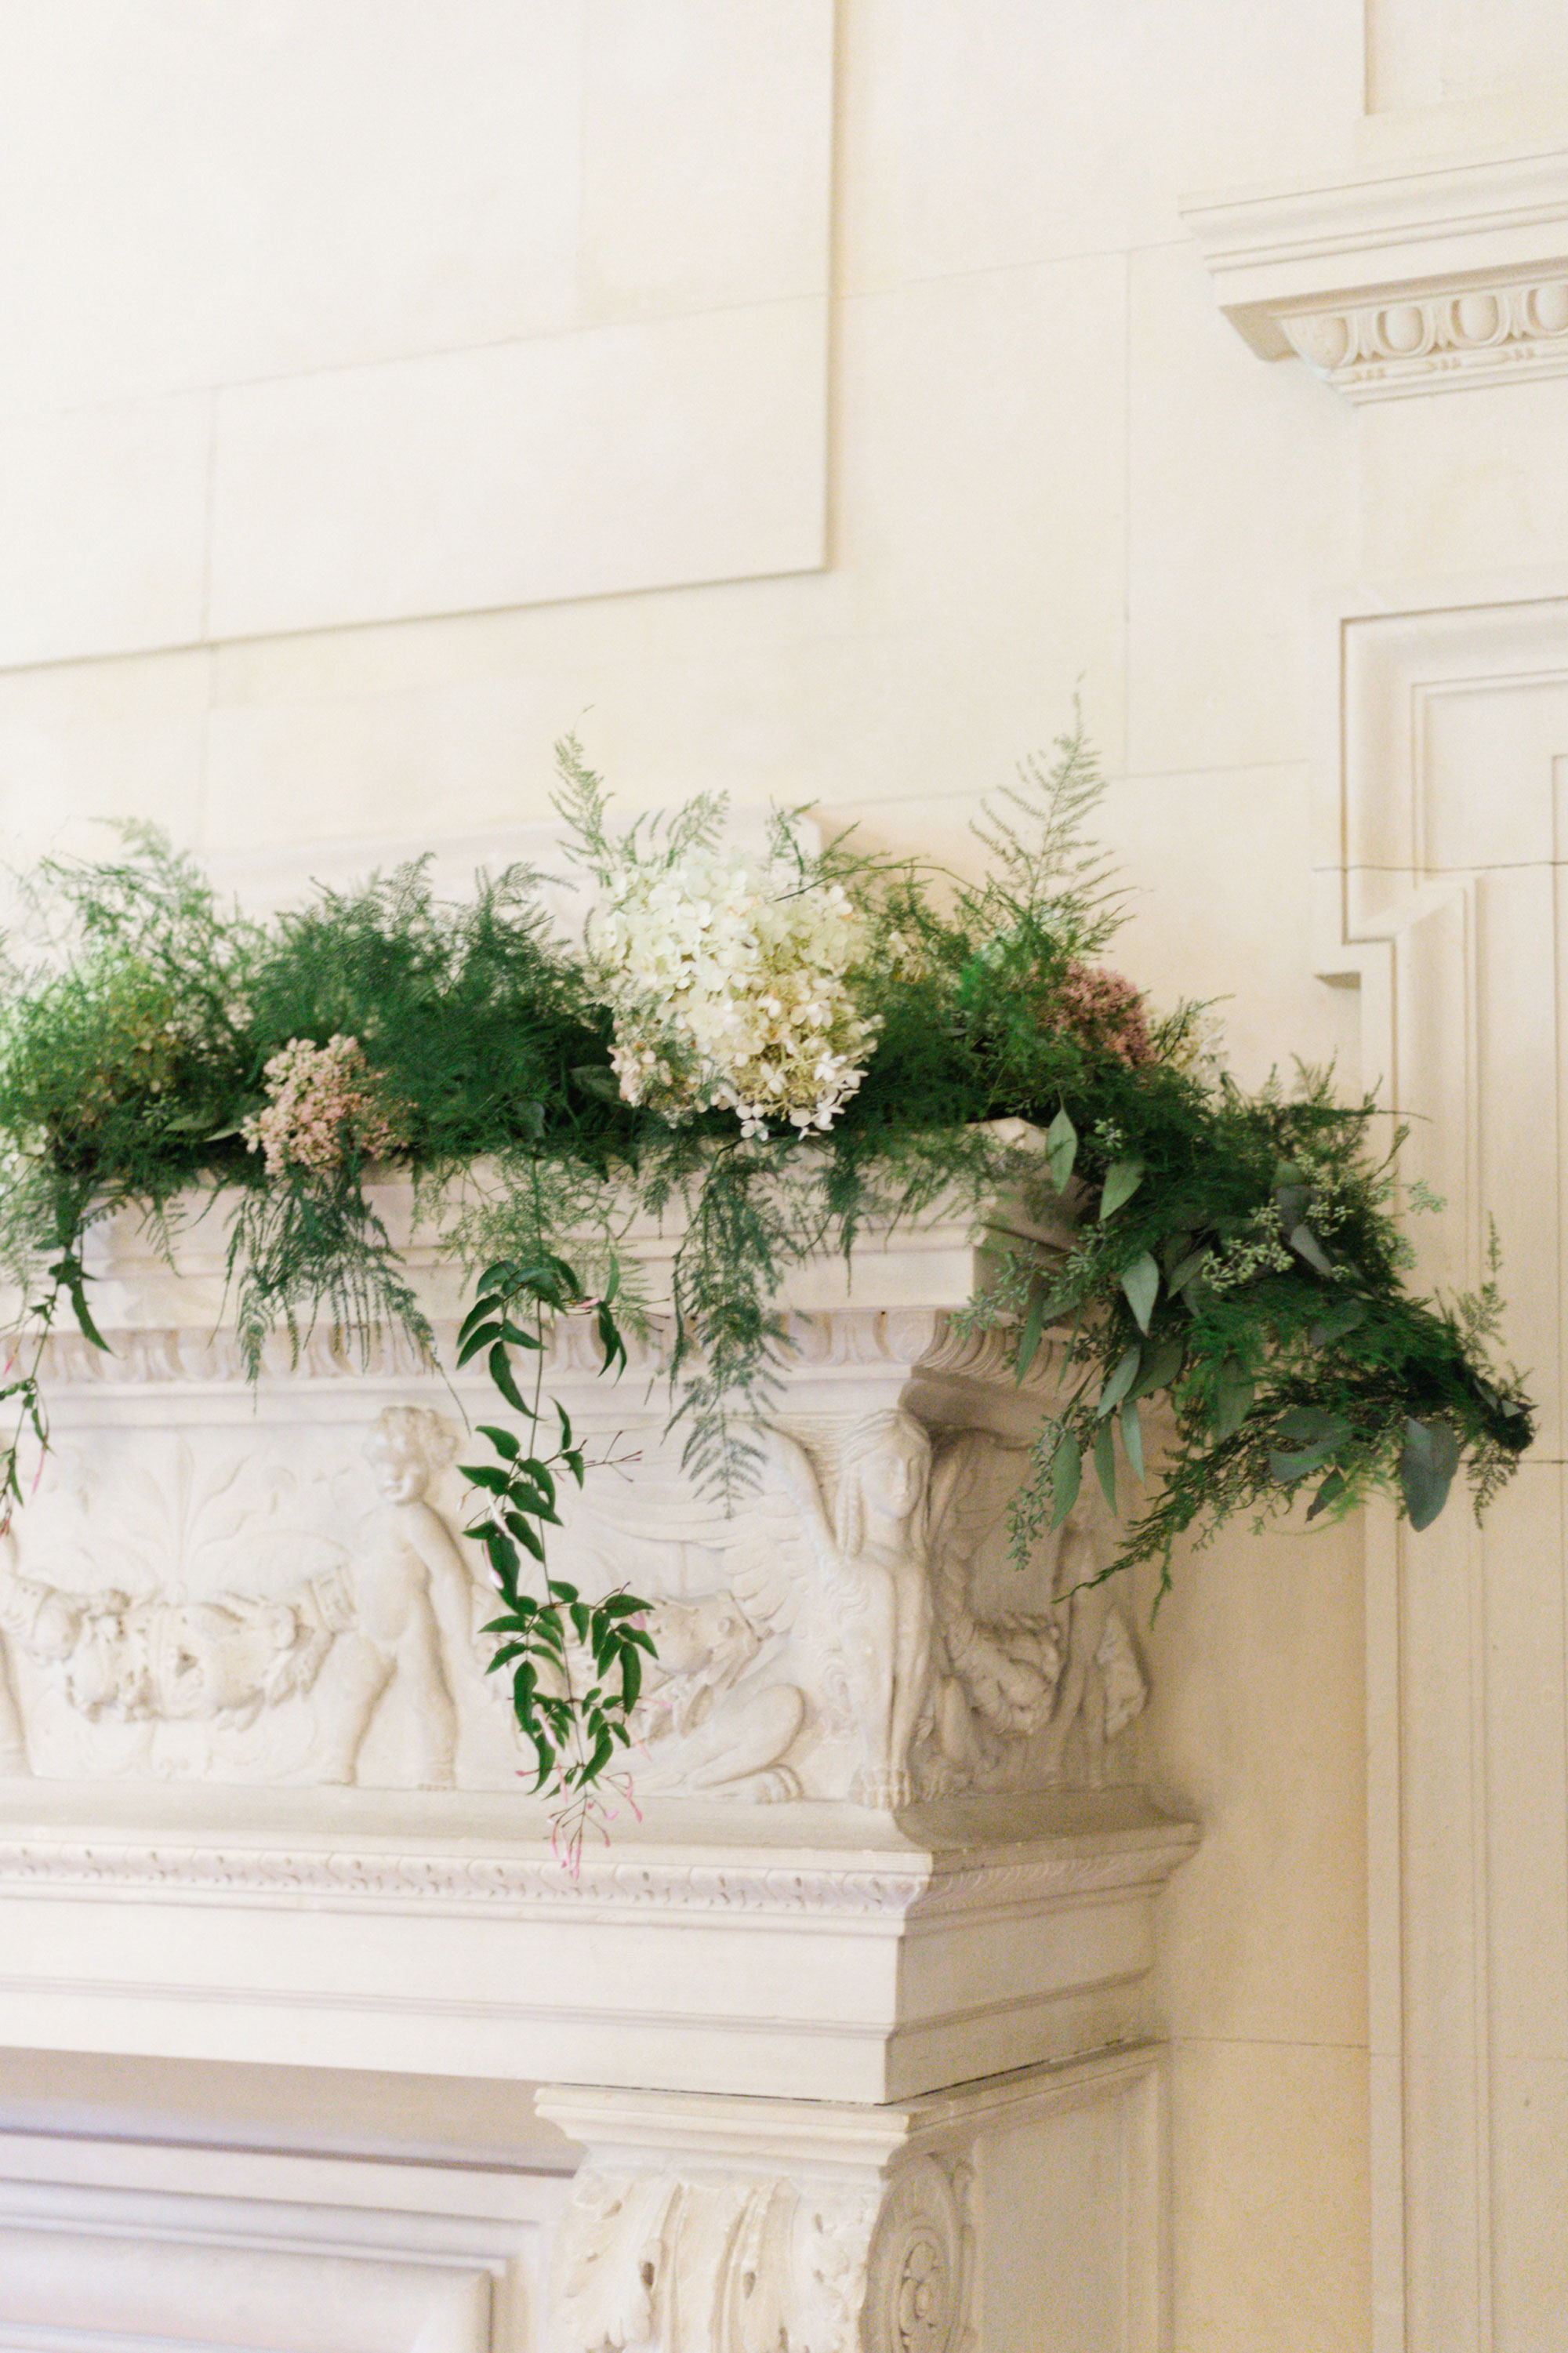 Fireplace decor for a wedding at the Mansion at Natirar by David Beahm and NYC Wedding Planner